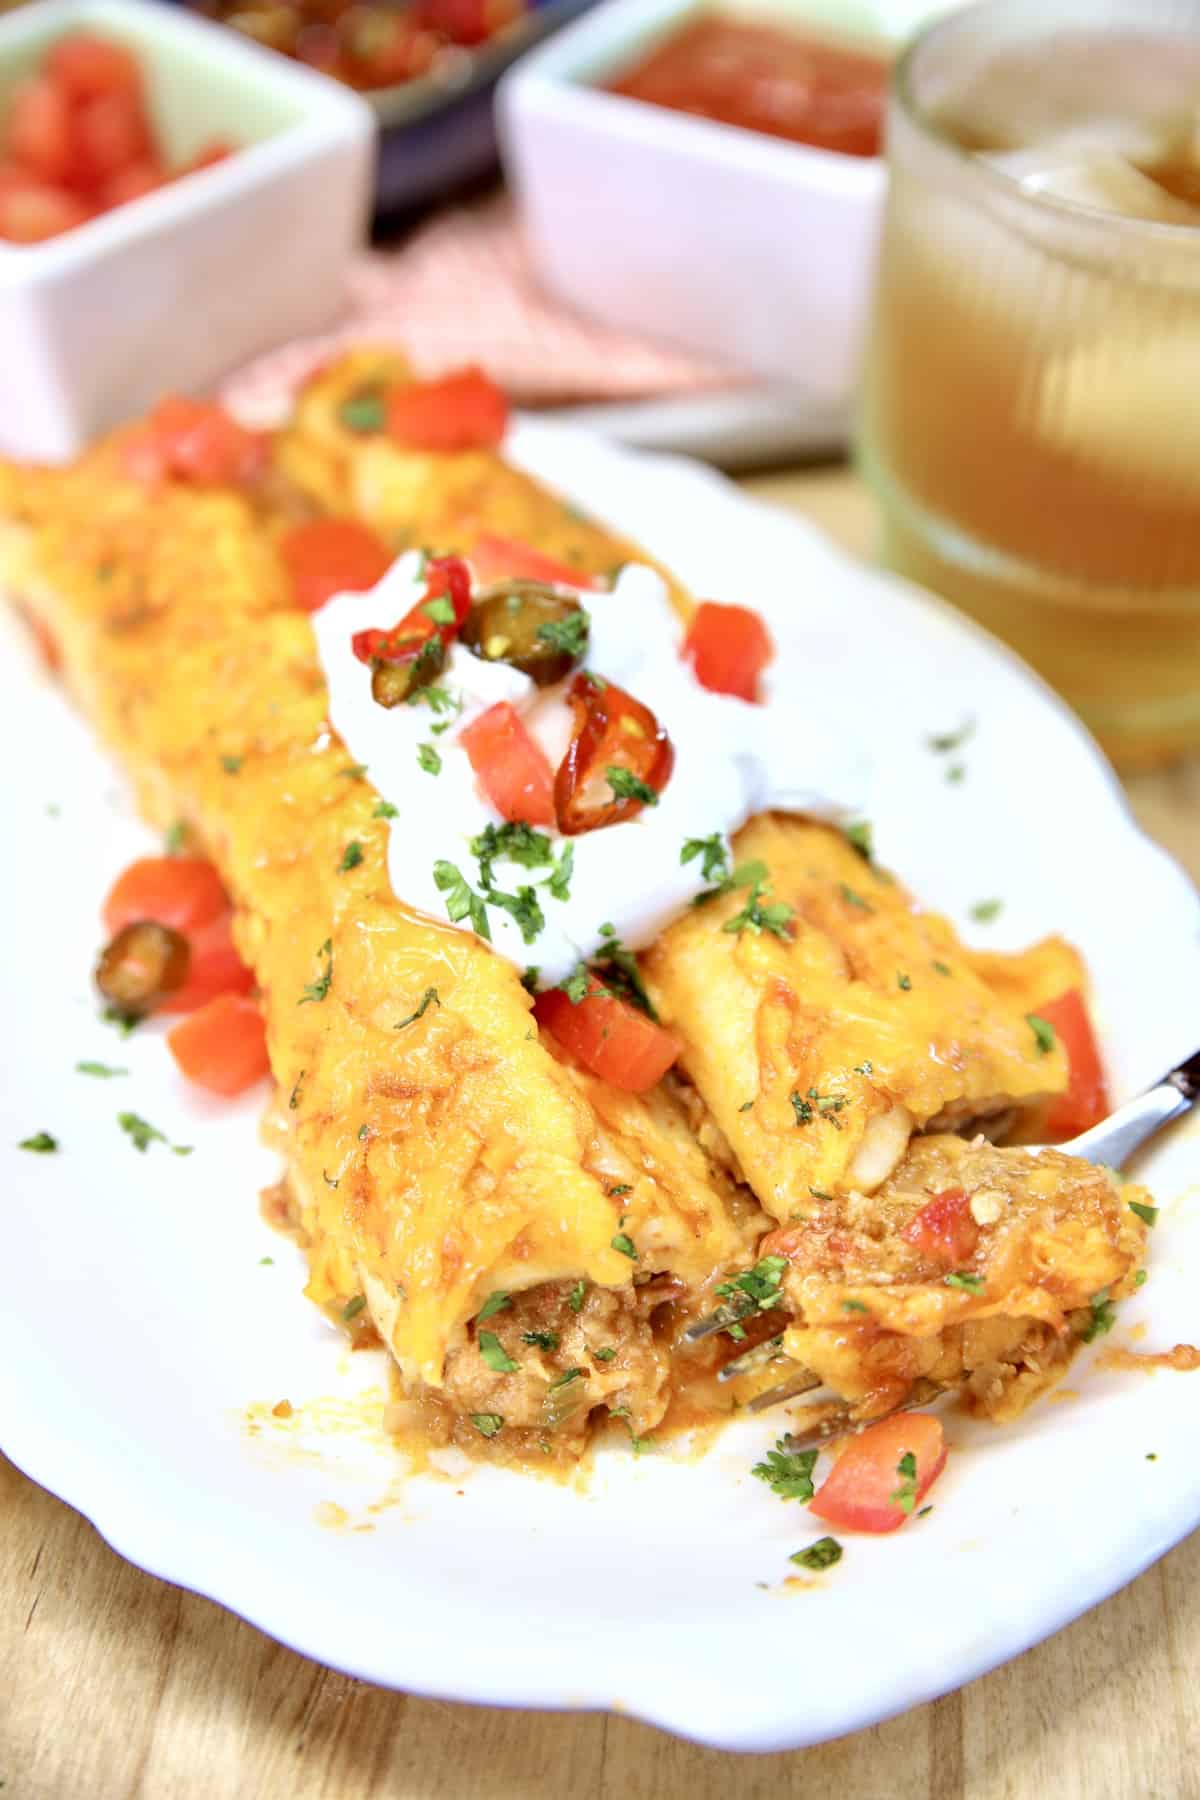 Plate with 2 pork enchiladas, topped with sour cream and tomatoes.